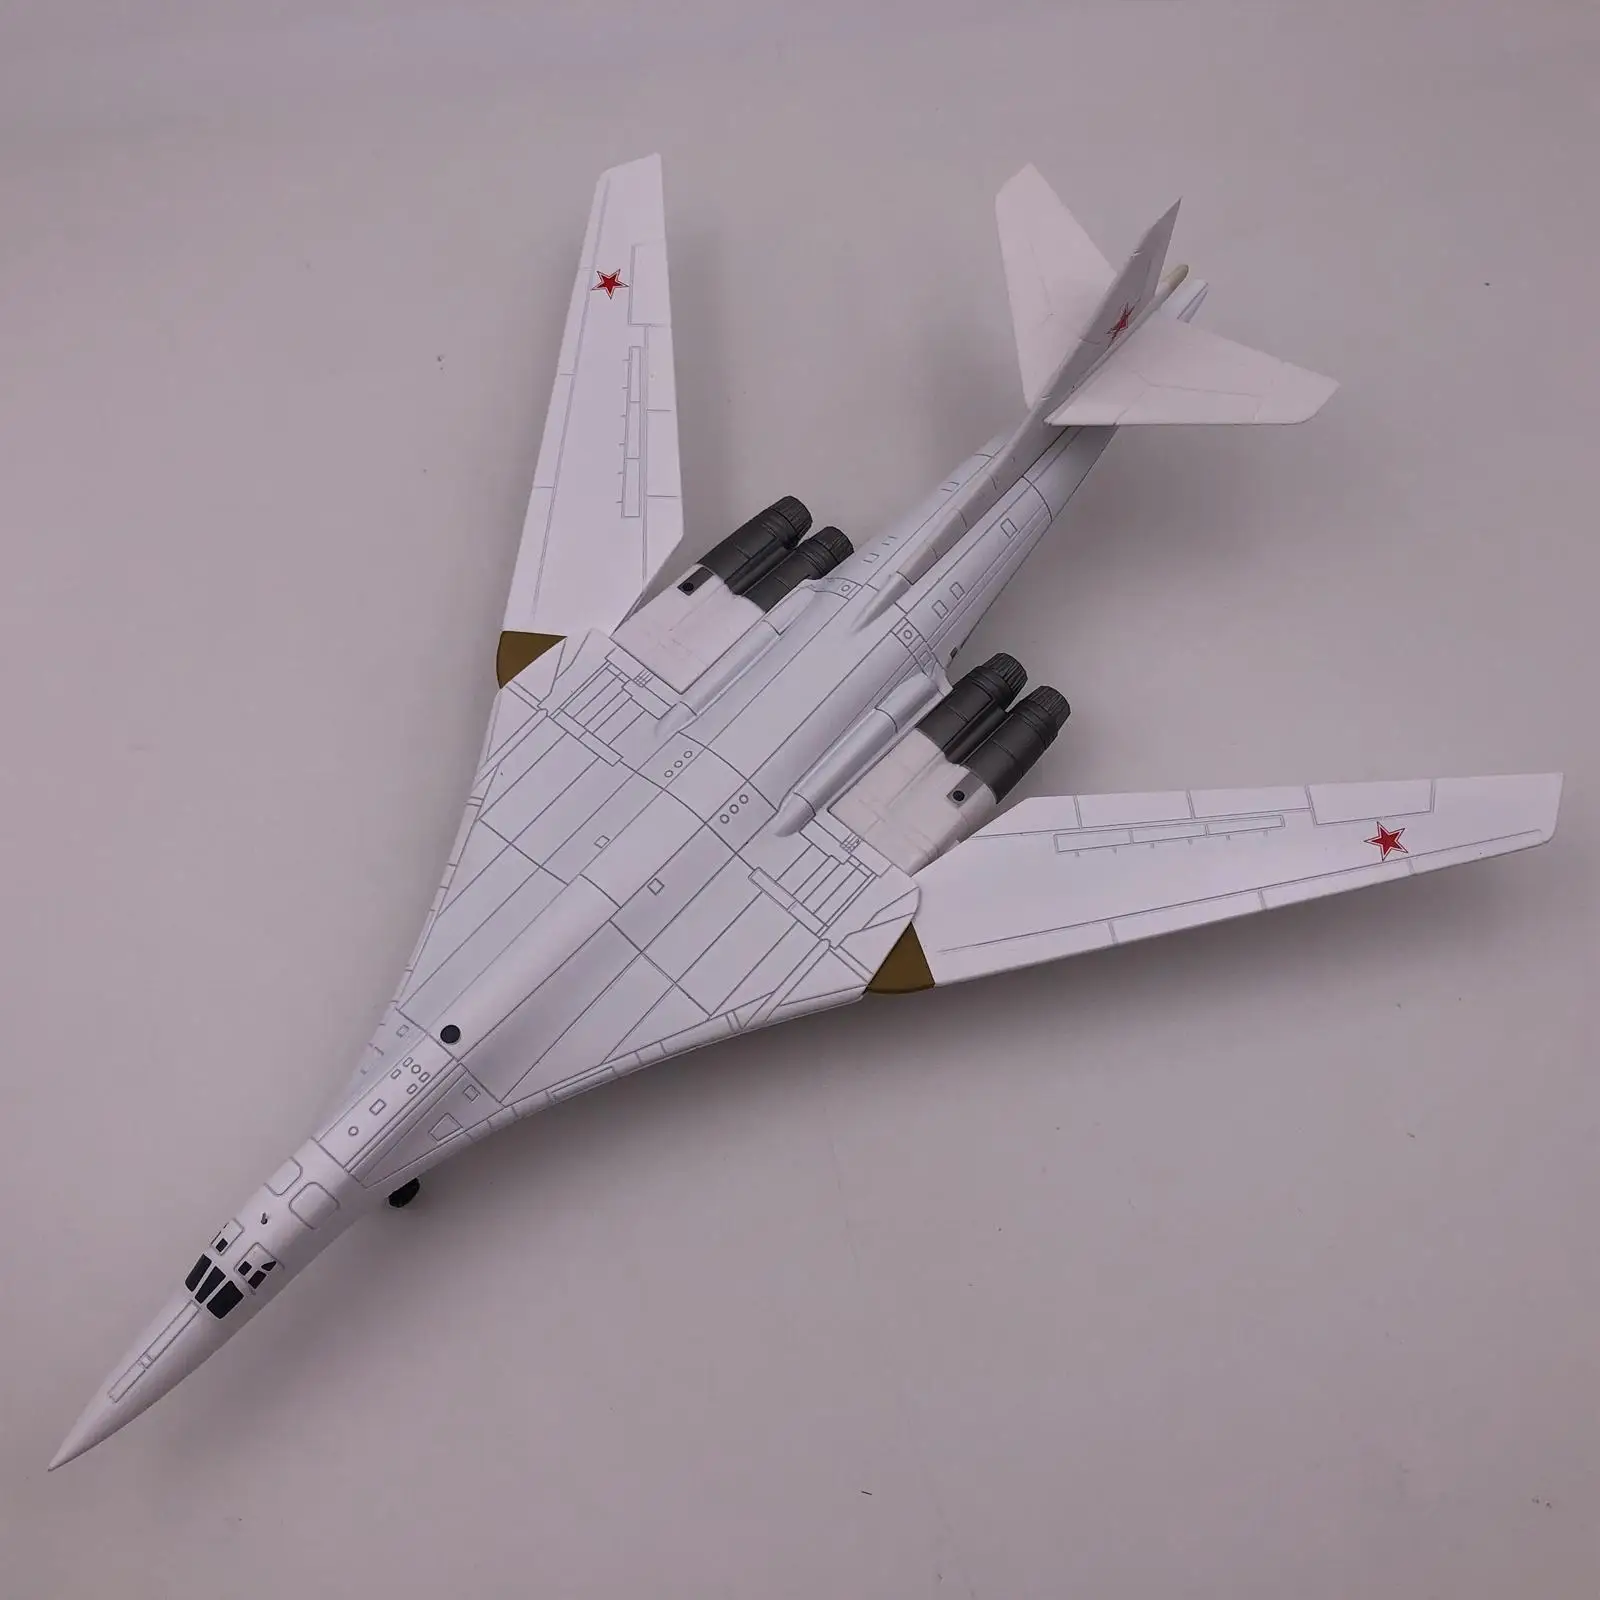 3D Bomber Fighter Model Plain Hobby Collectible with Stand 1:200 Scale Air Planes Diecast for Office Collection Adults Kid